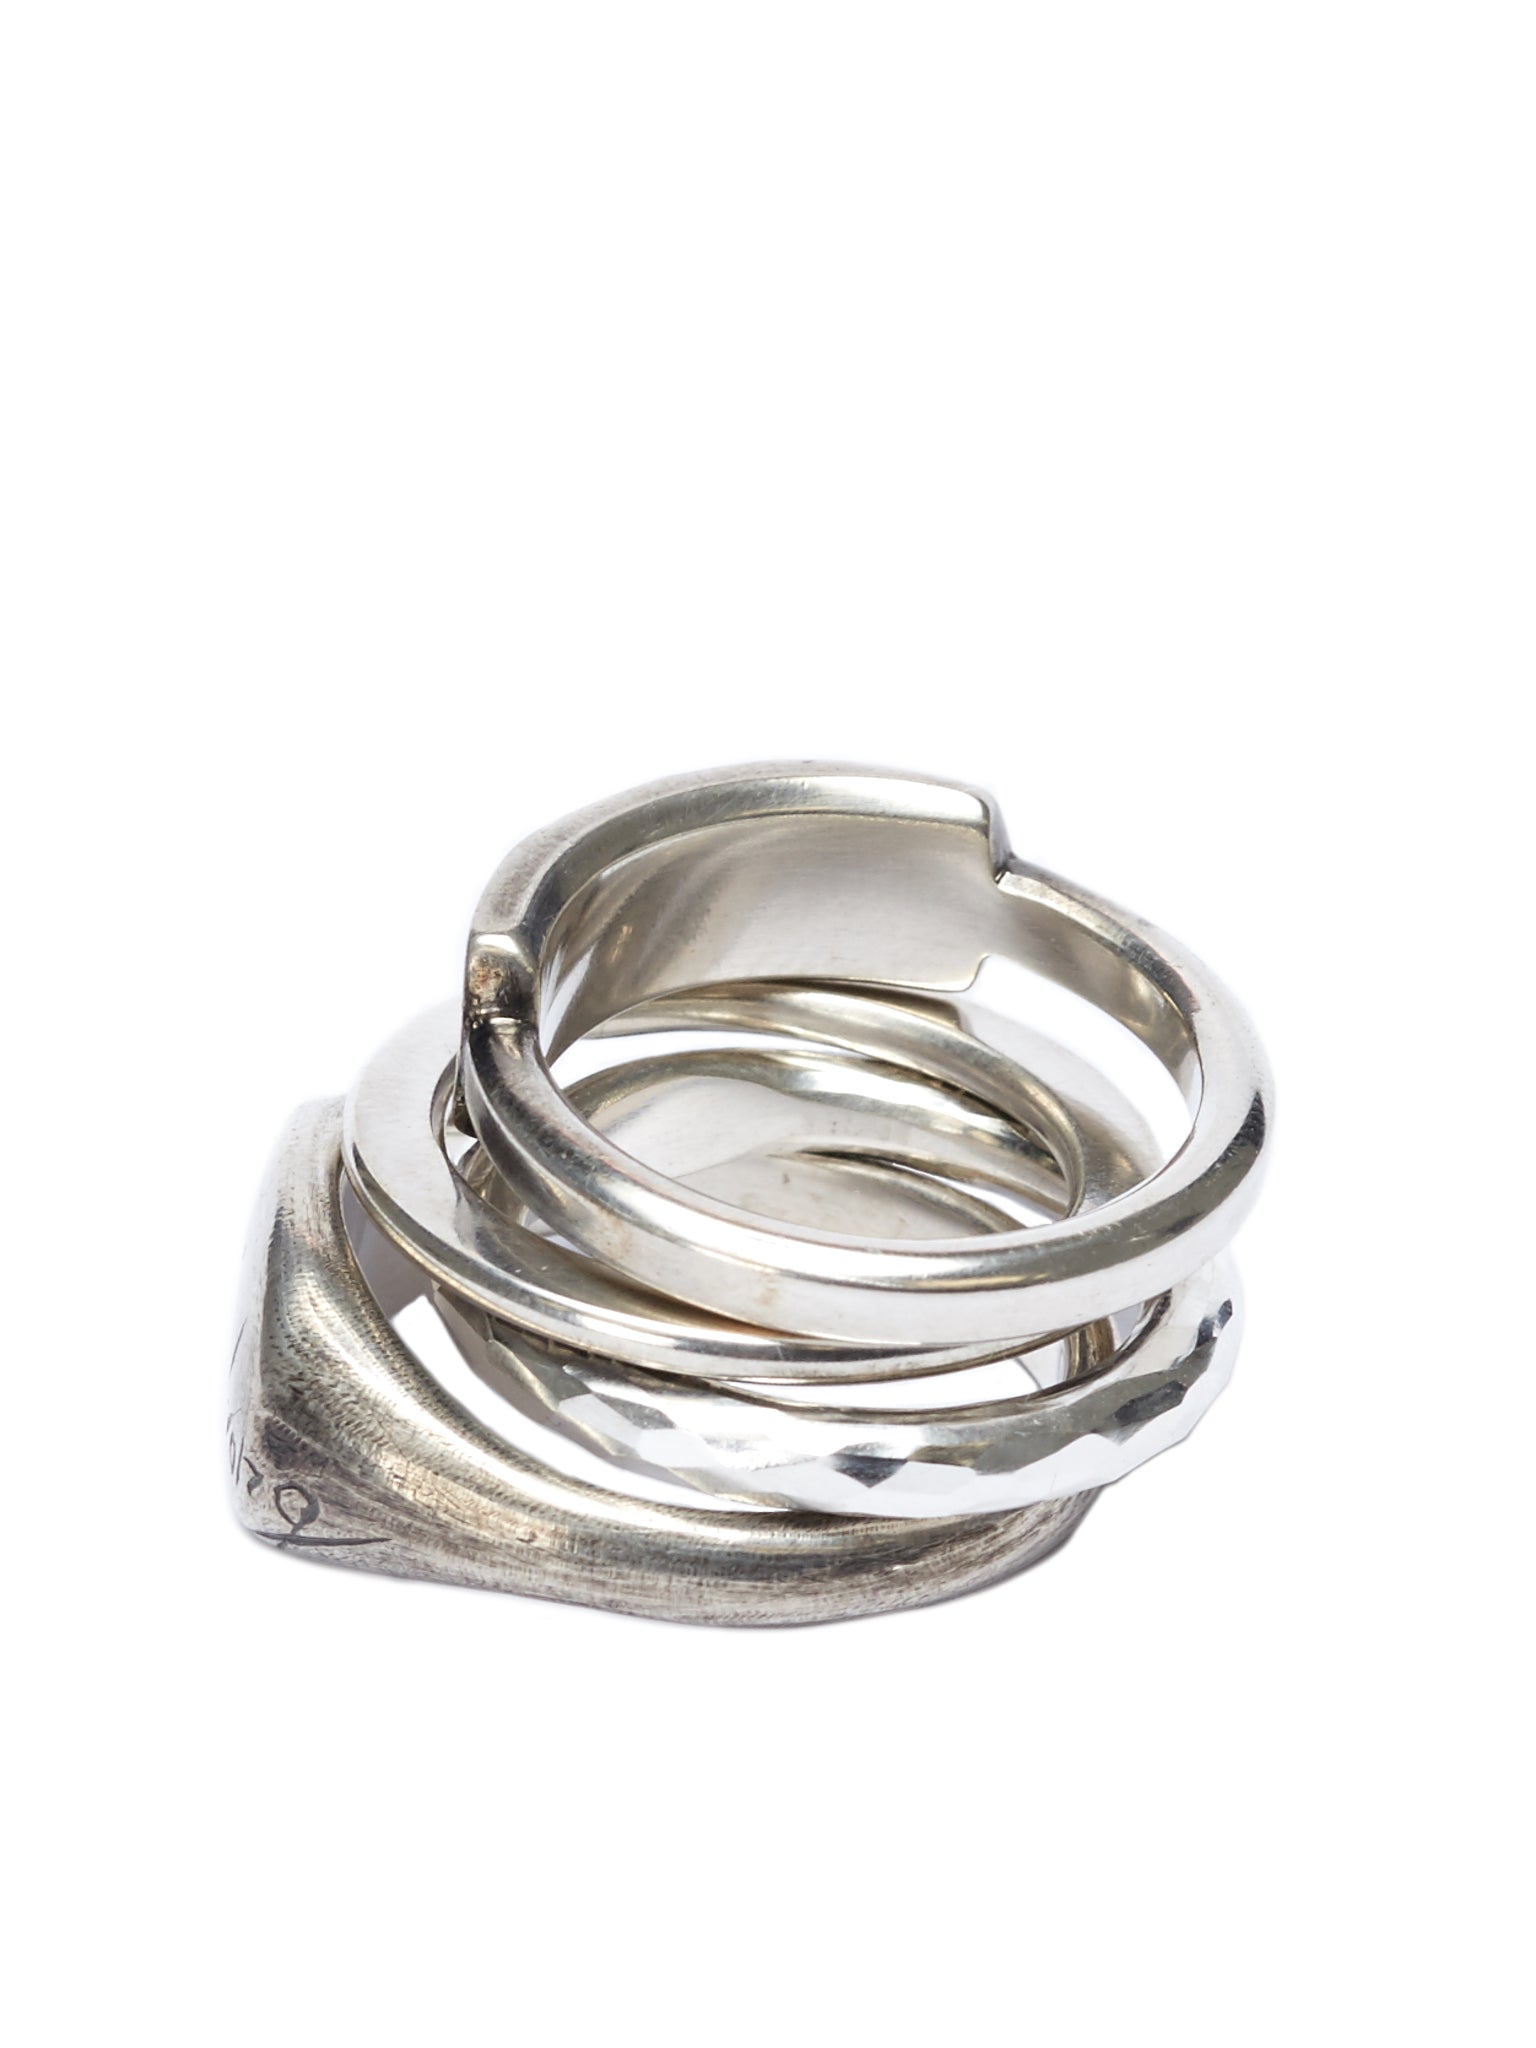 Four Ring Combination (M1183-SILVER)